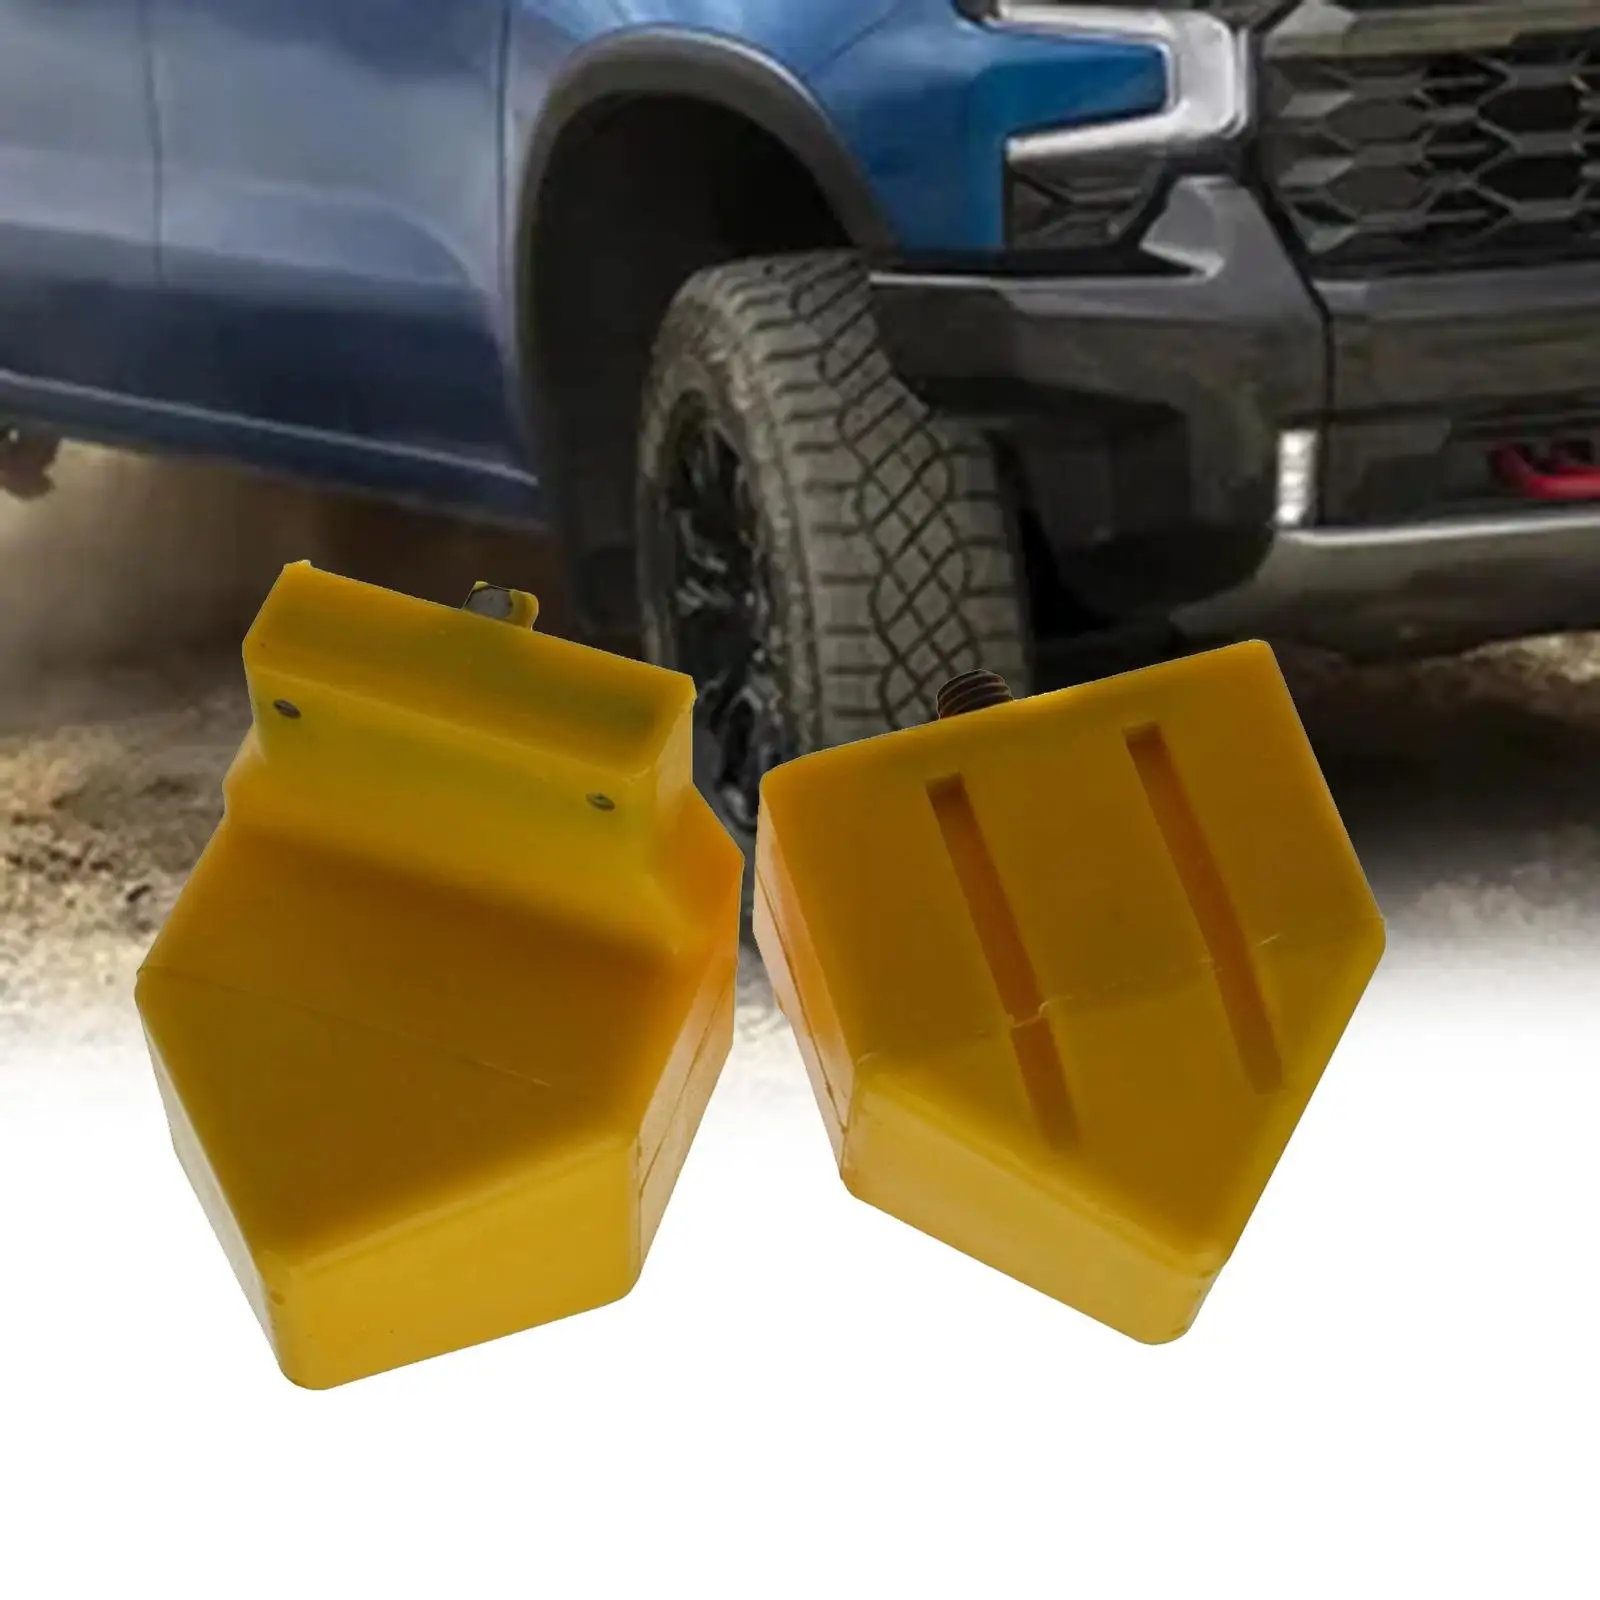 2Pcs Sturdy Control Arm Bumpers Assembly Repair Automotive Front bumpers stopper for Chevrolet Silverado 2500 HD